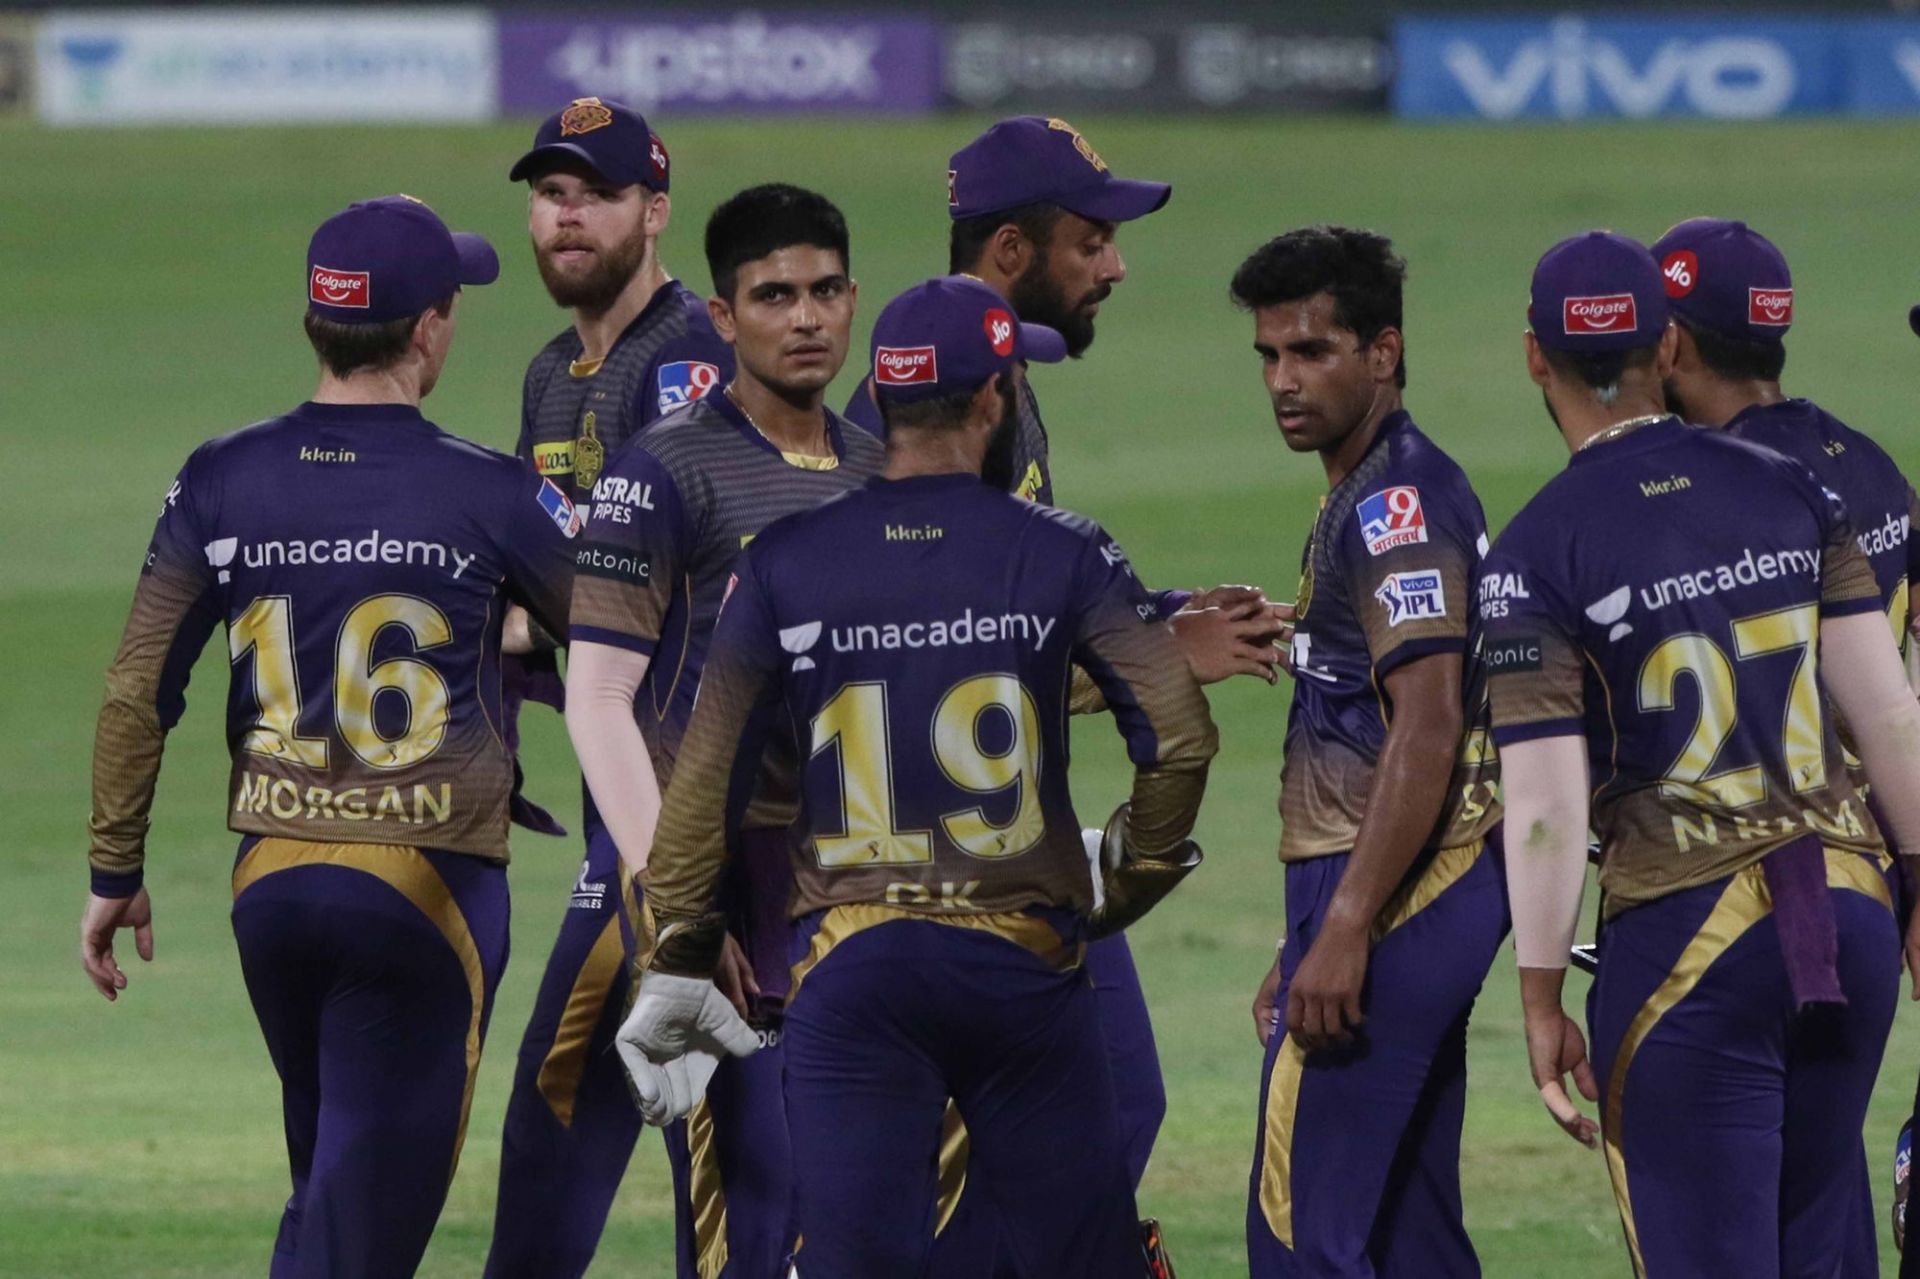 Kolkata Knight Riders roared back from the abyss to finish as the runners-up of IPL 2021 (Picture Credits: Pankaj Nangia/Sportzpics/IPL).